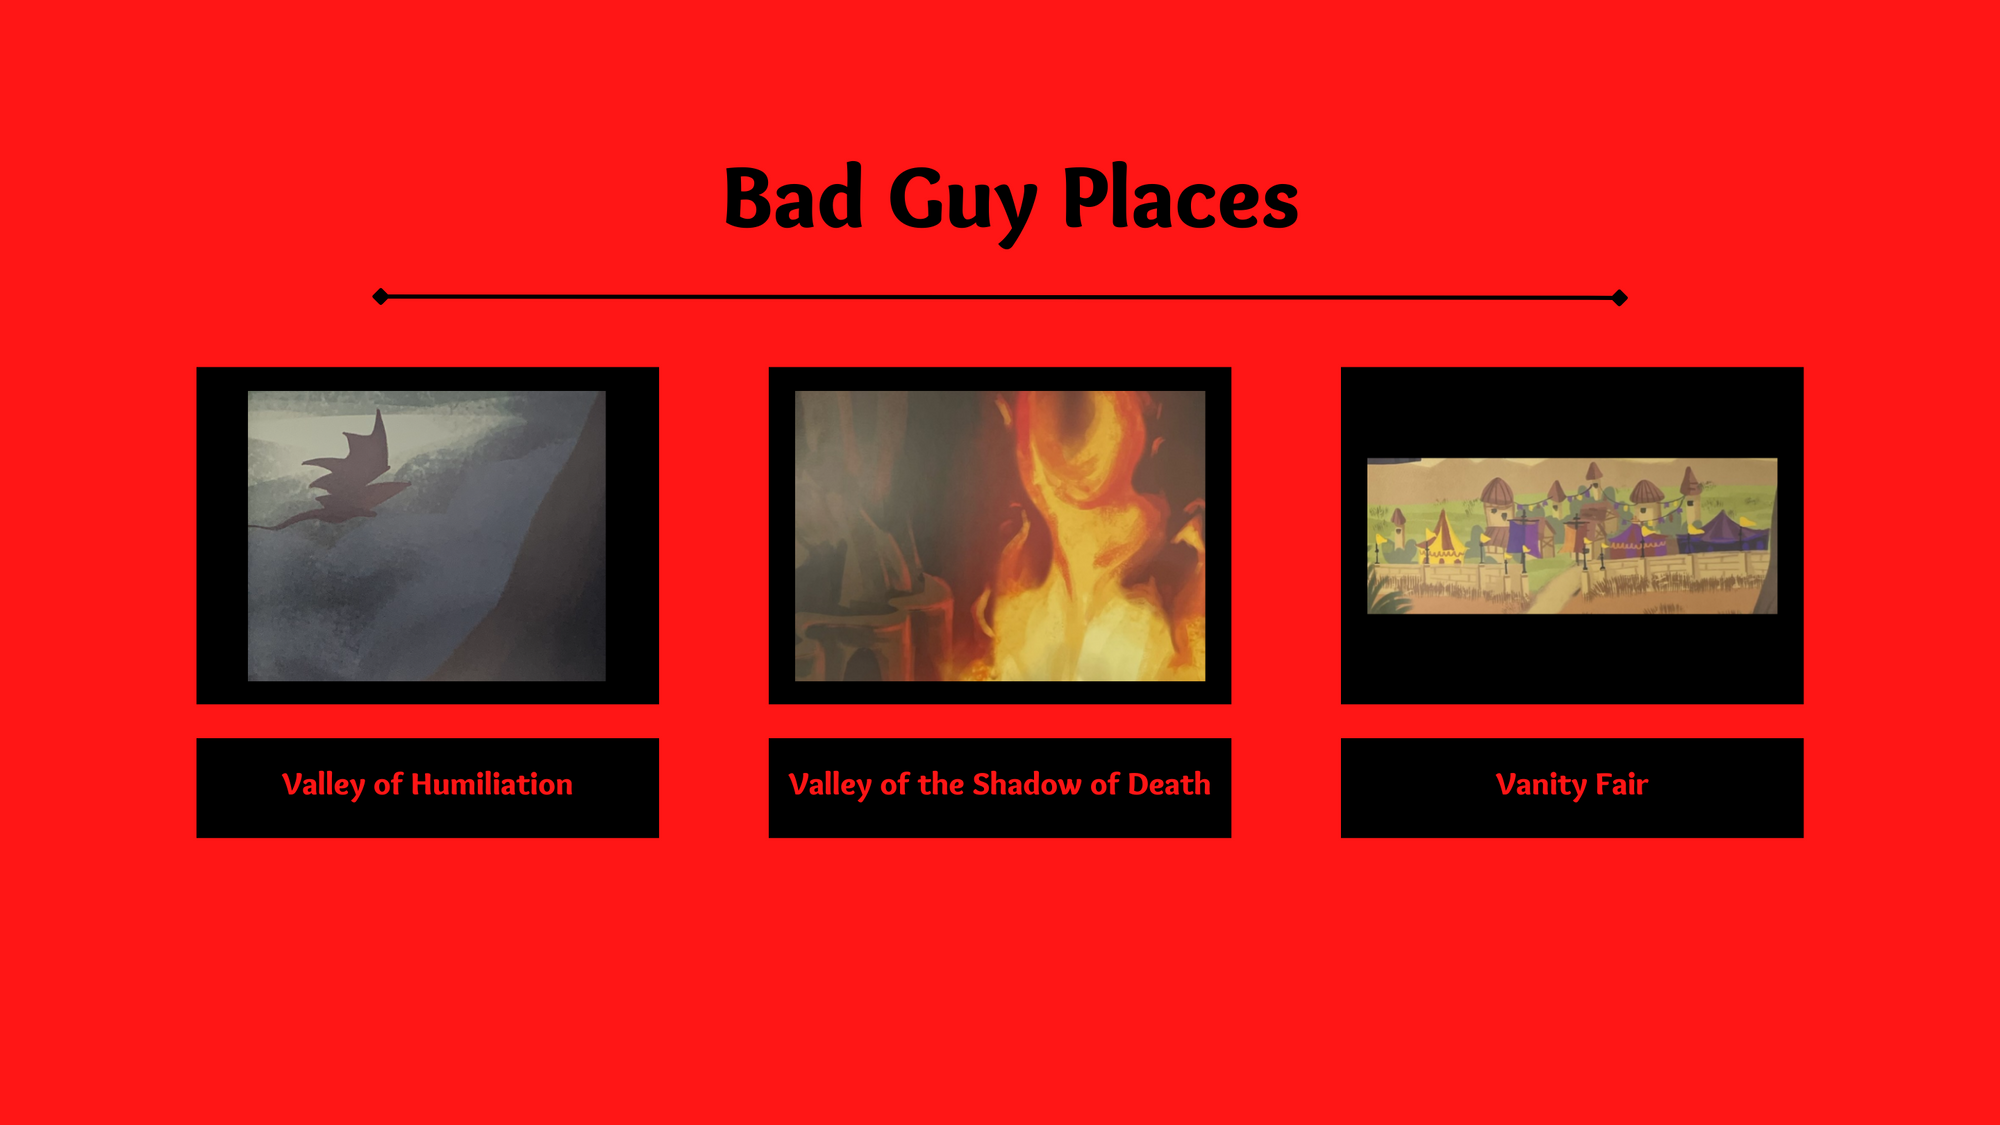 Modern Guide of 'Bad Guy' Places in Little Pilgrim's Progress - Wholesom Books For the Family - Father Abraham